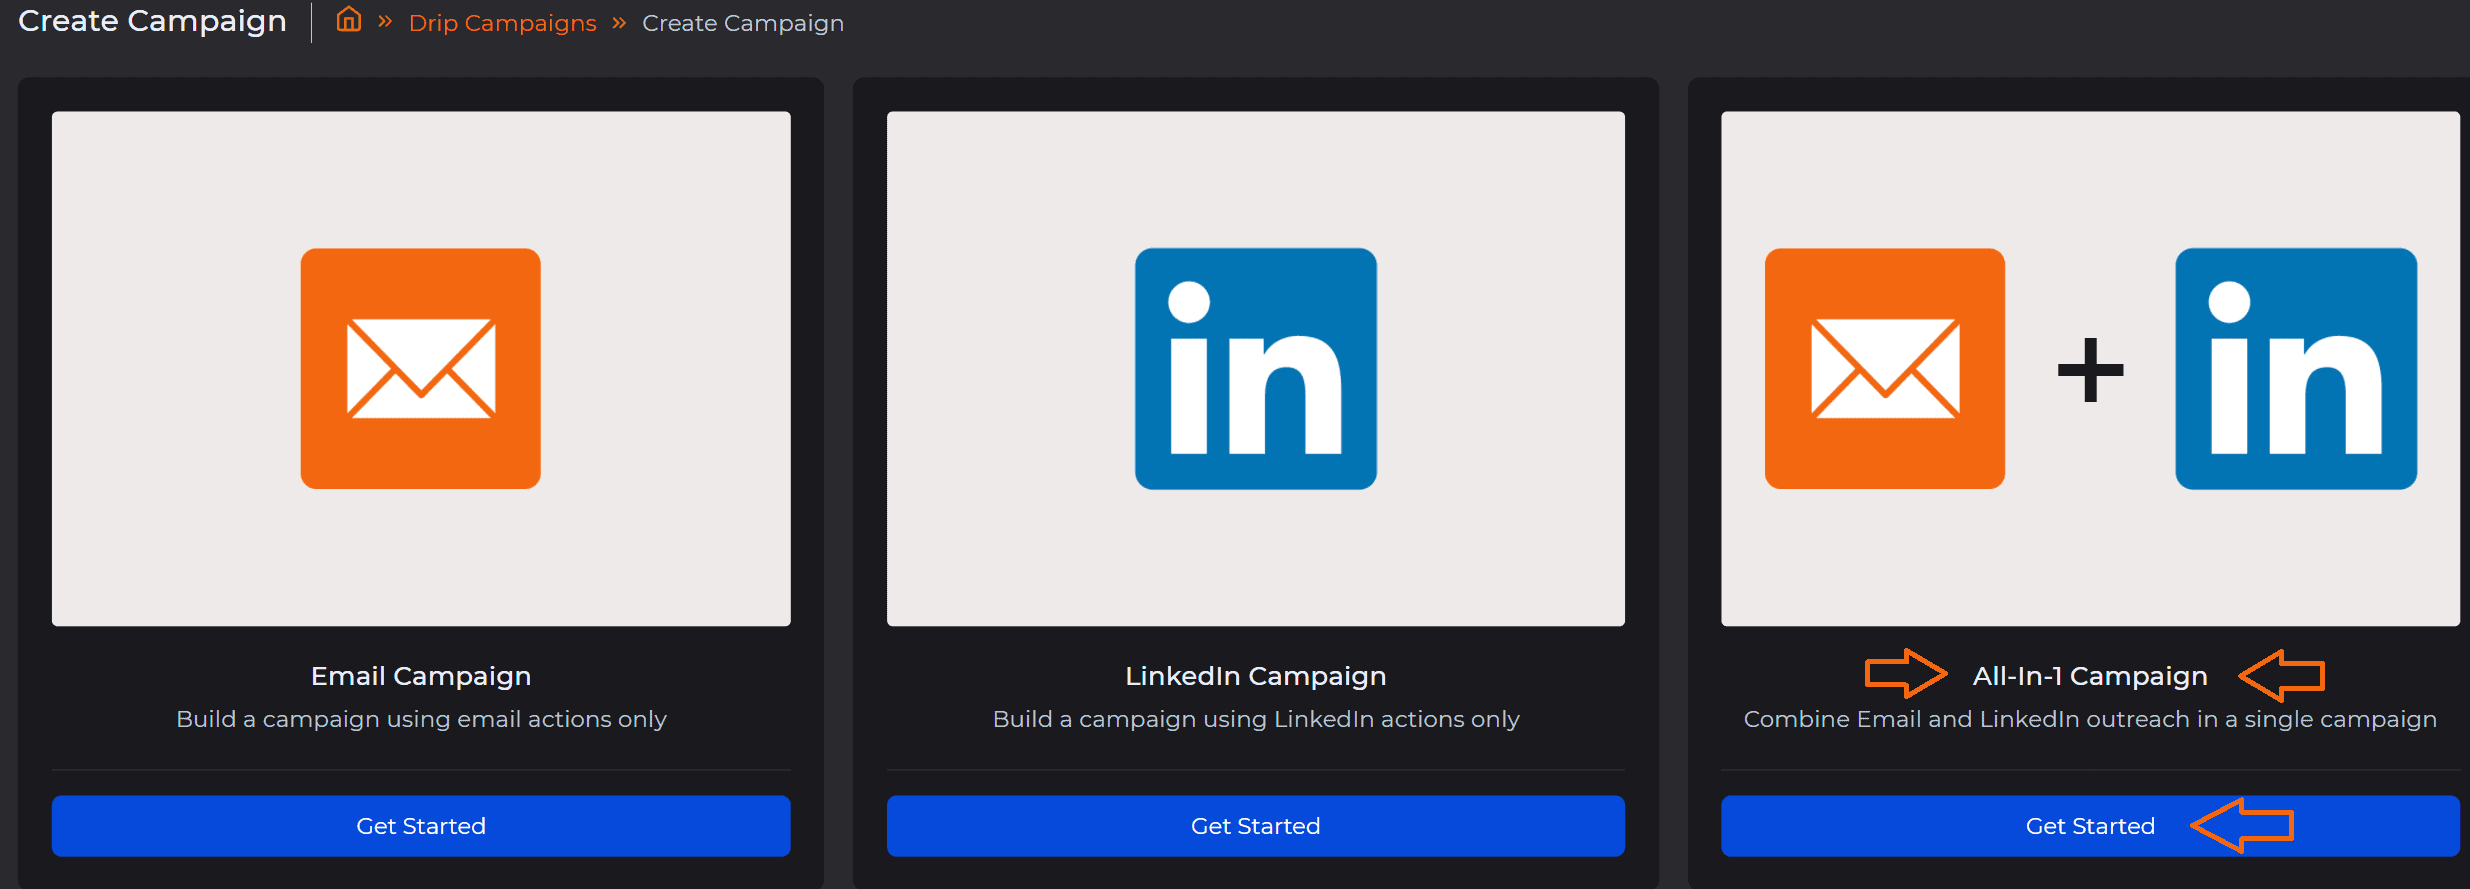 linkedin and email drip campaign